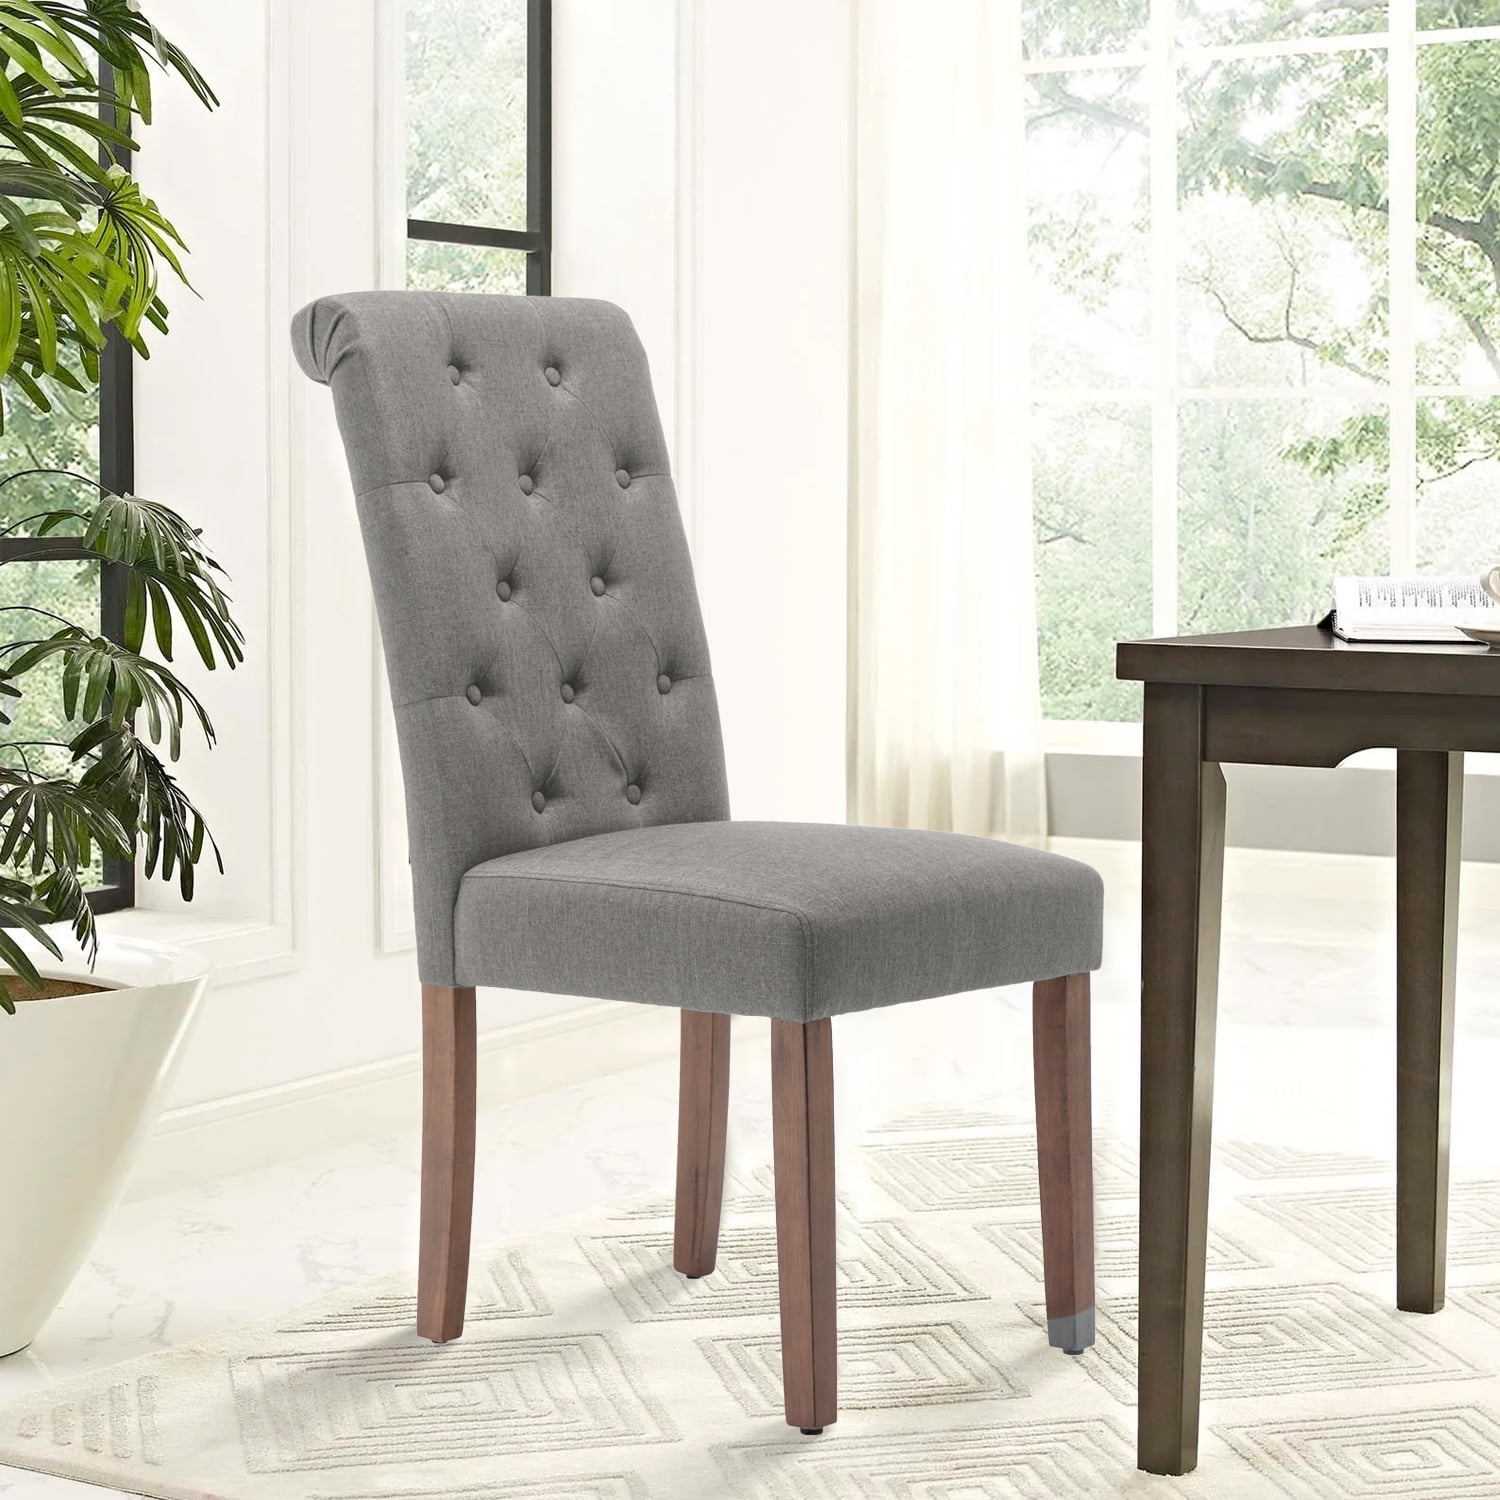 Upholstered Dining Chairs Set of 2, Solid Wood Tufted Parsons Dining